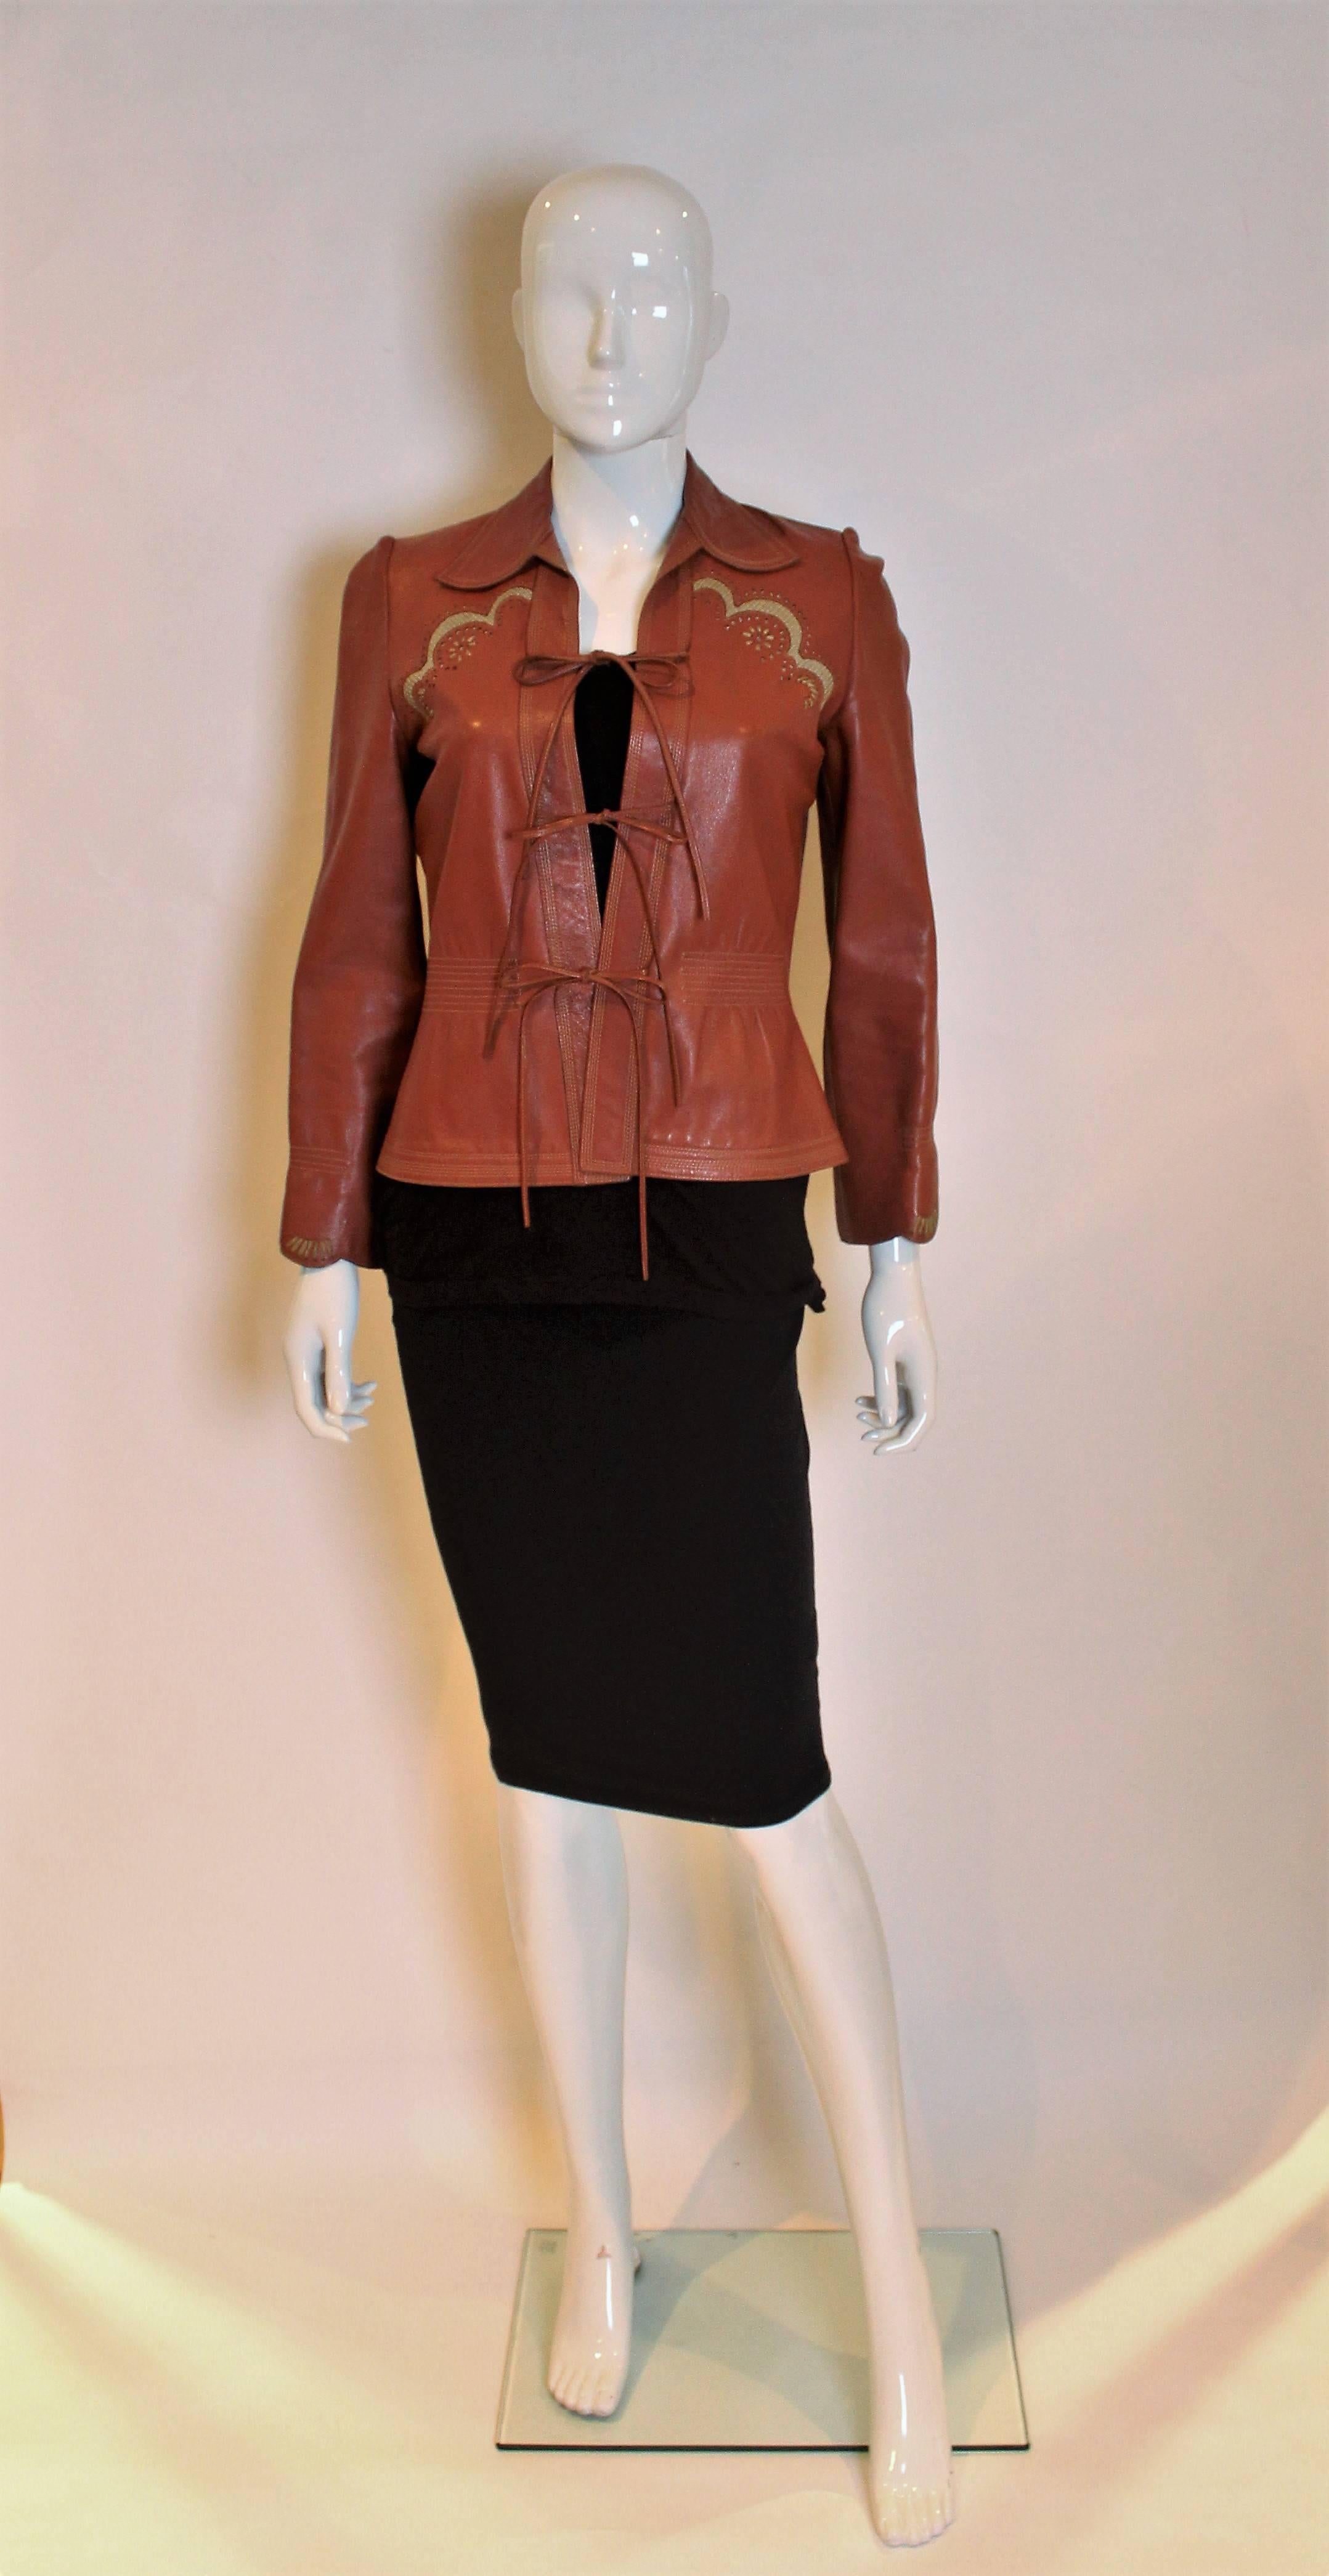 Women's 1970s leather jacket by Jean and Michael Pallant